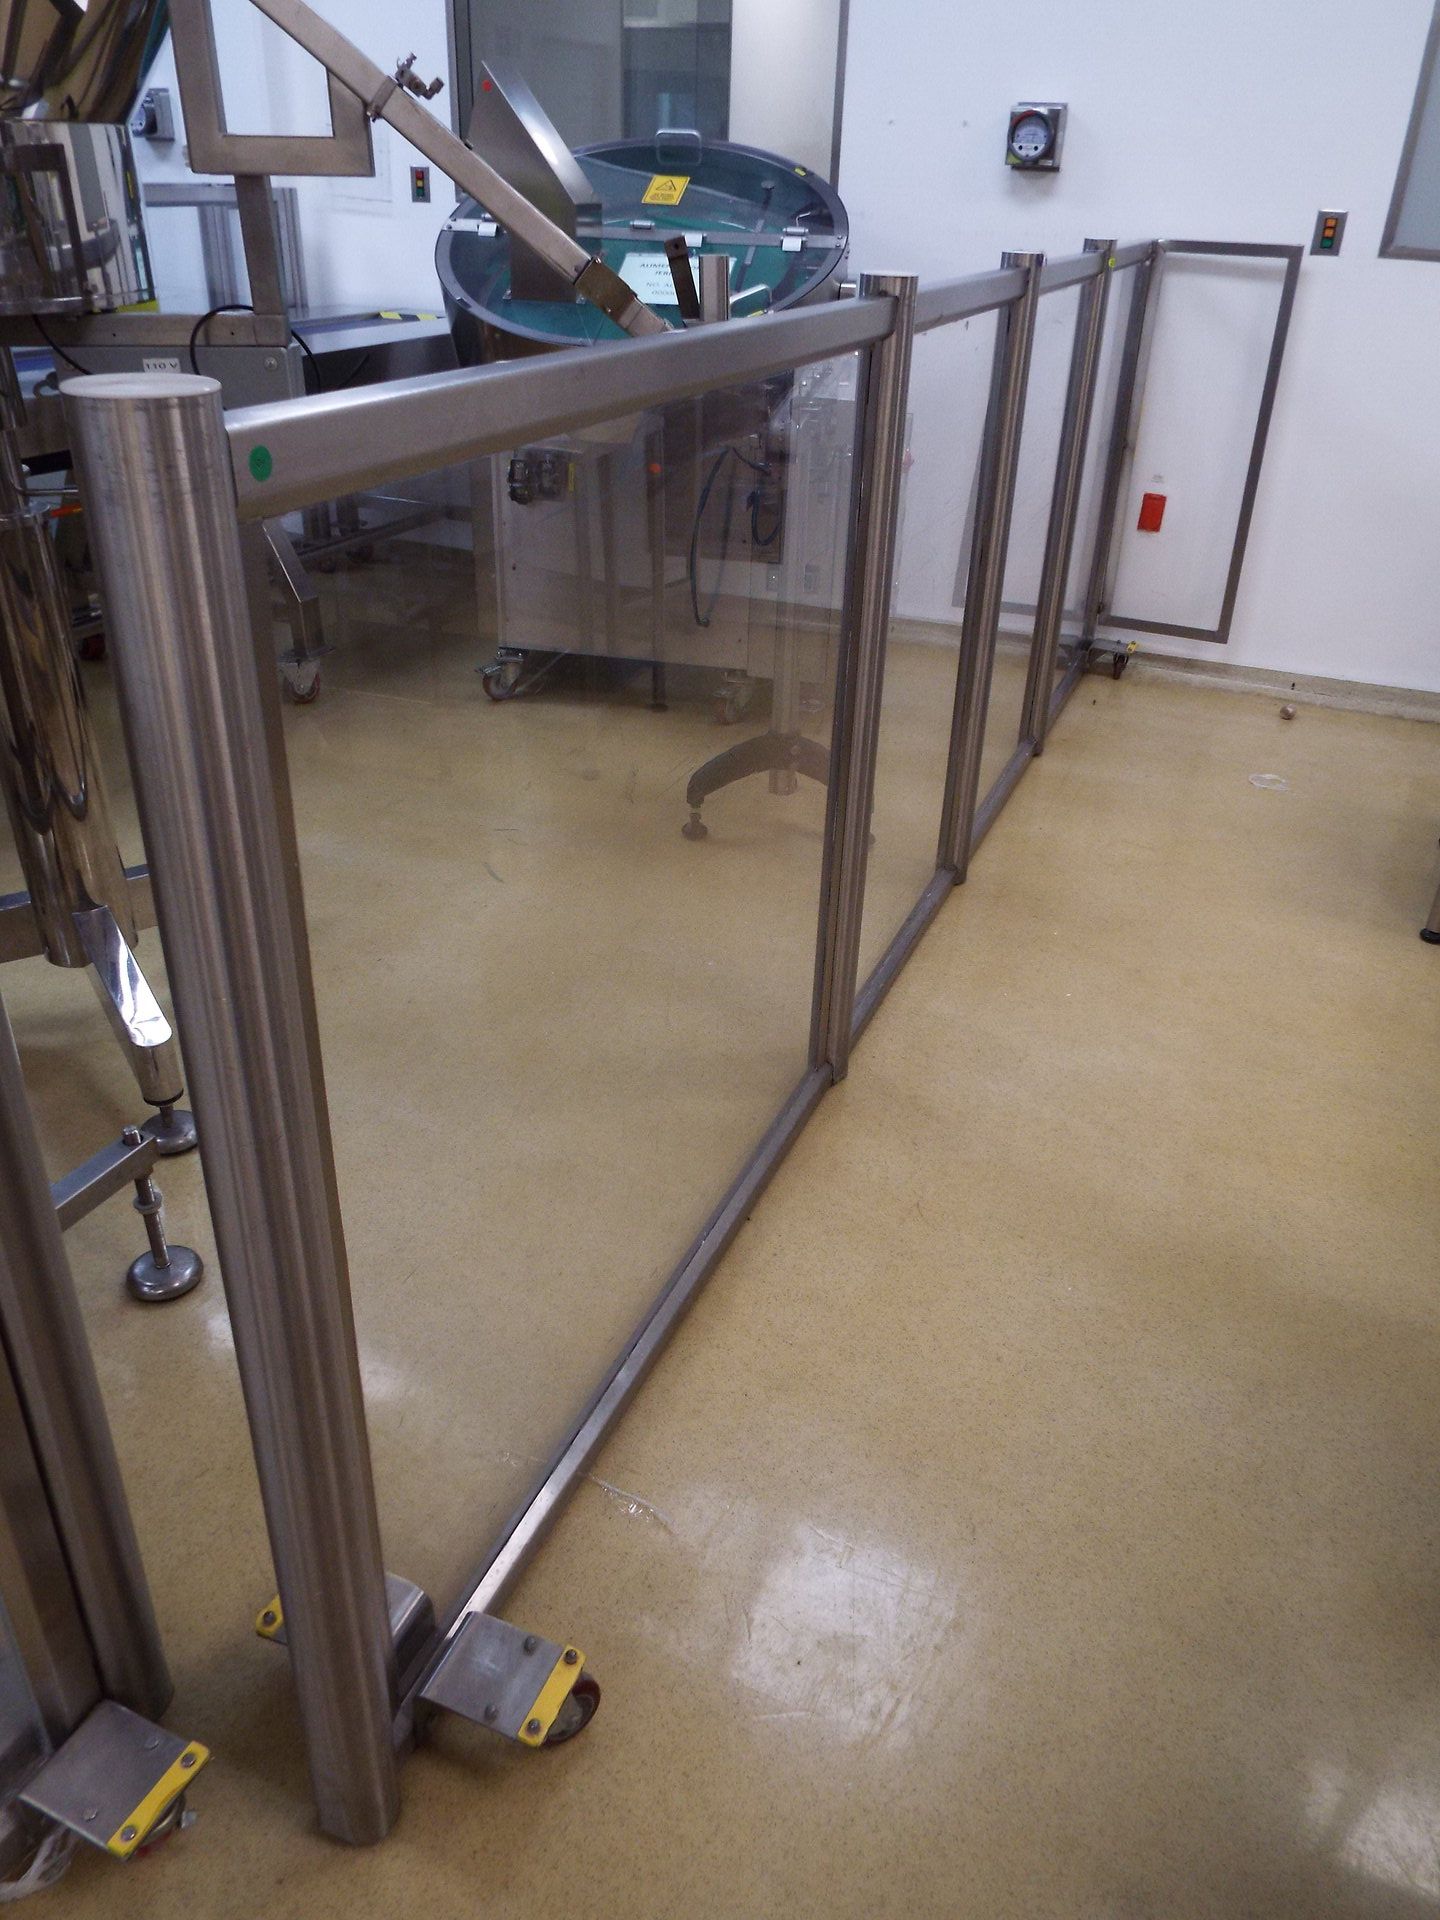 Stainless steel and polycarbonate screen on casters